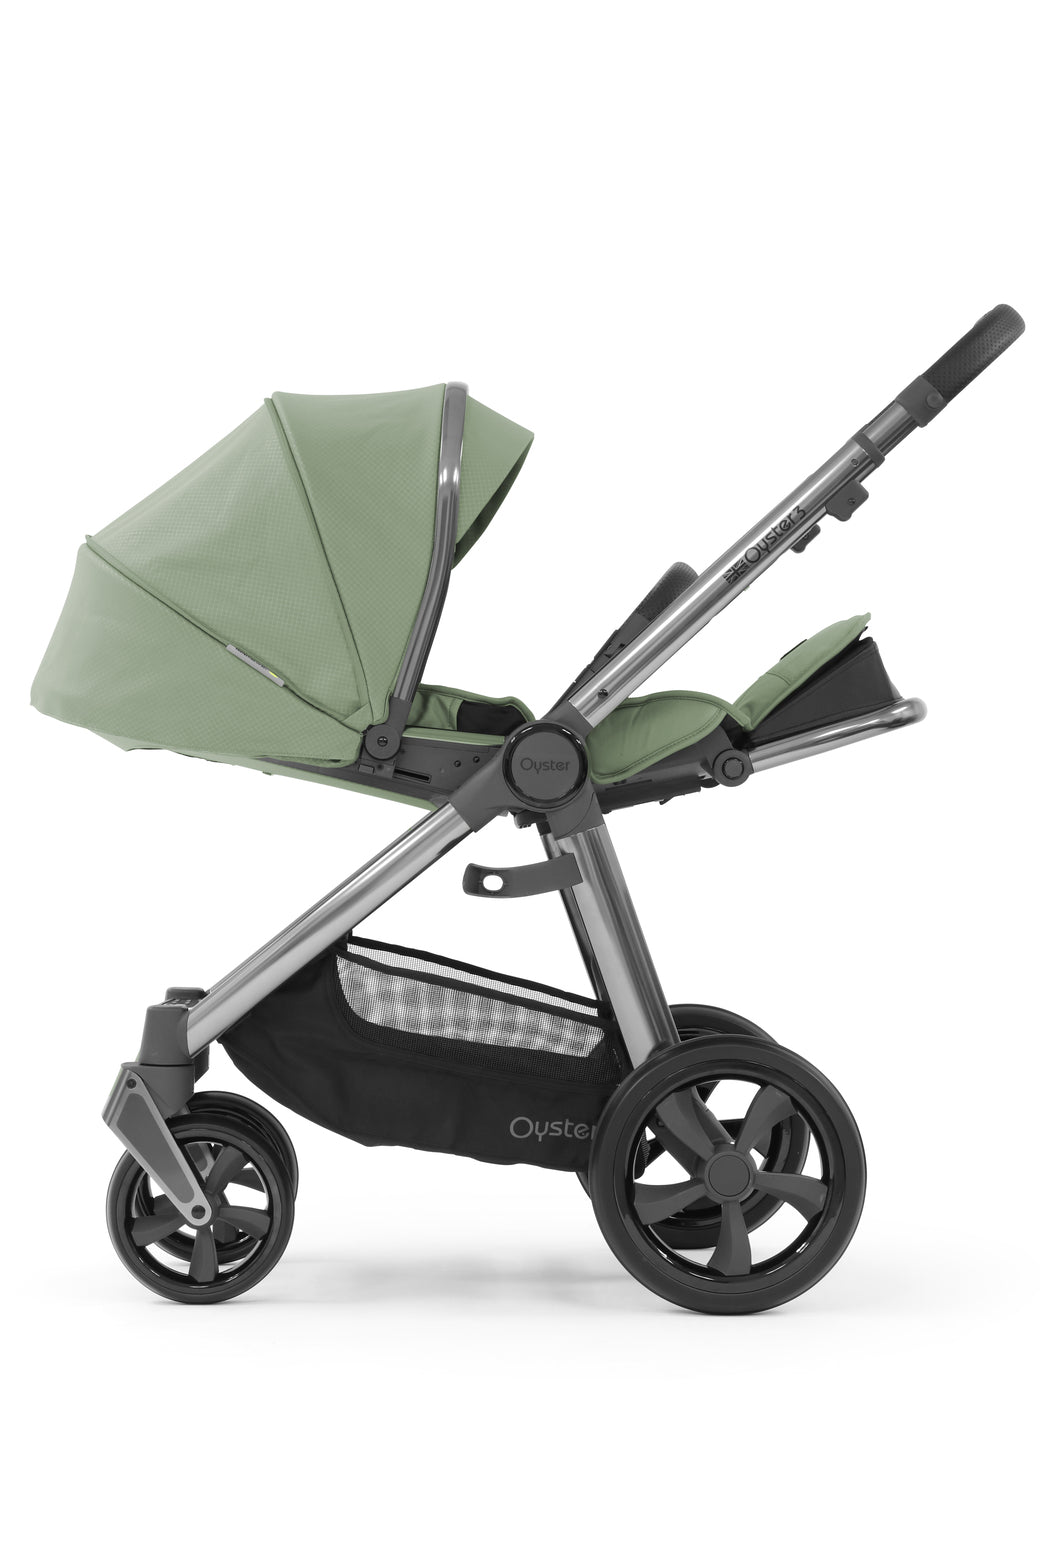 Babystyle Oyster 3 Ultimate 12 Piece Travel System Bundle With Pebble 360 Pro - Spearmint -  | For Your Little One